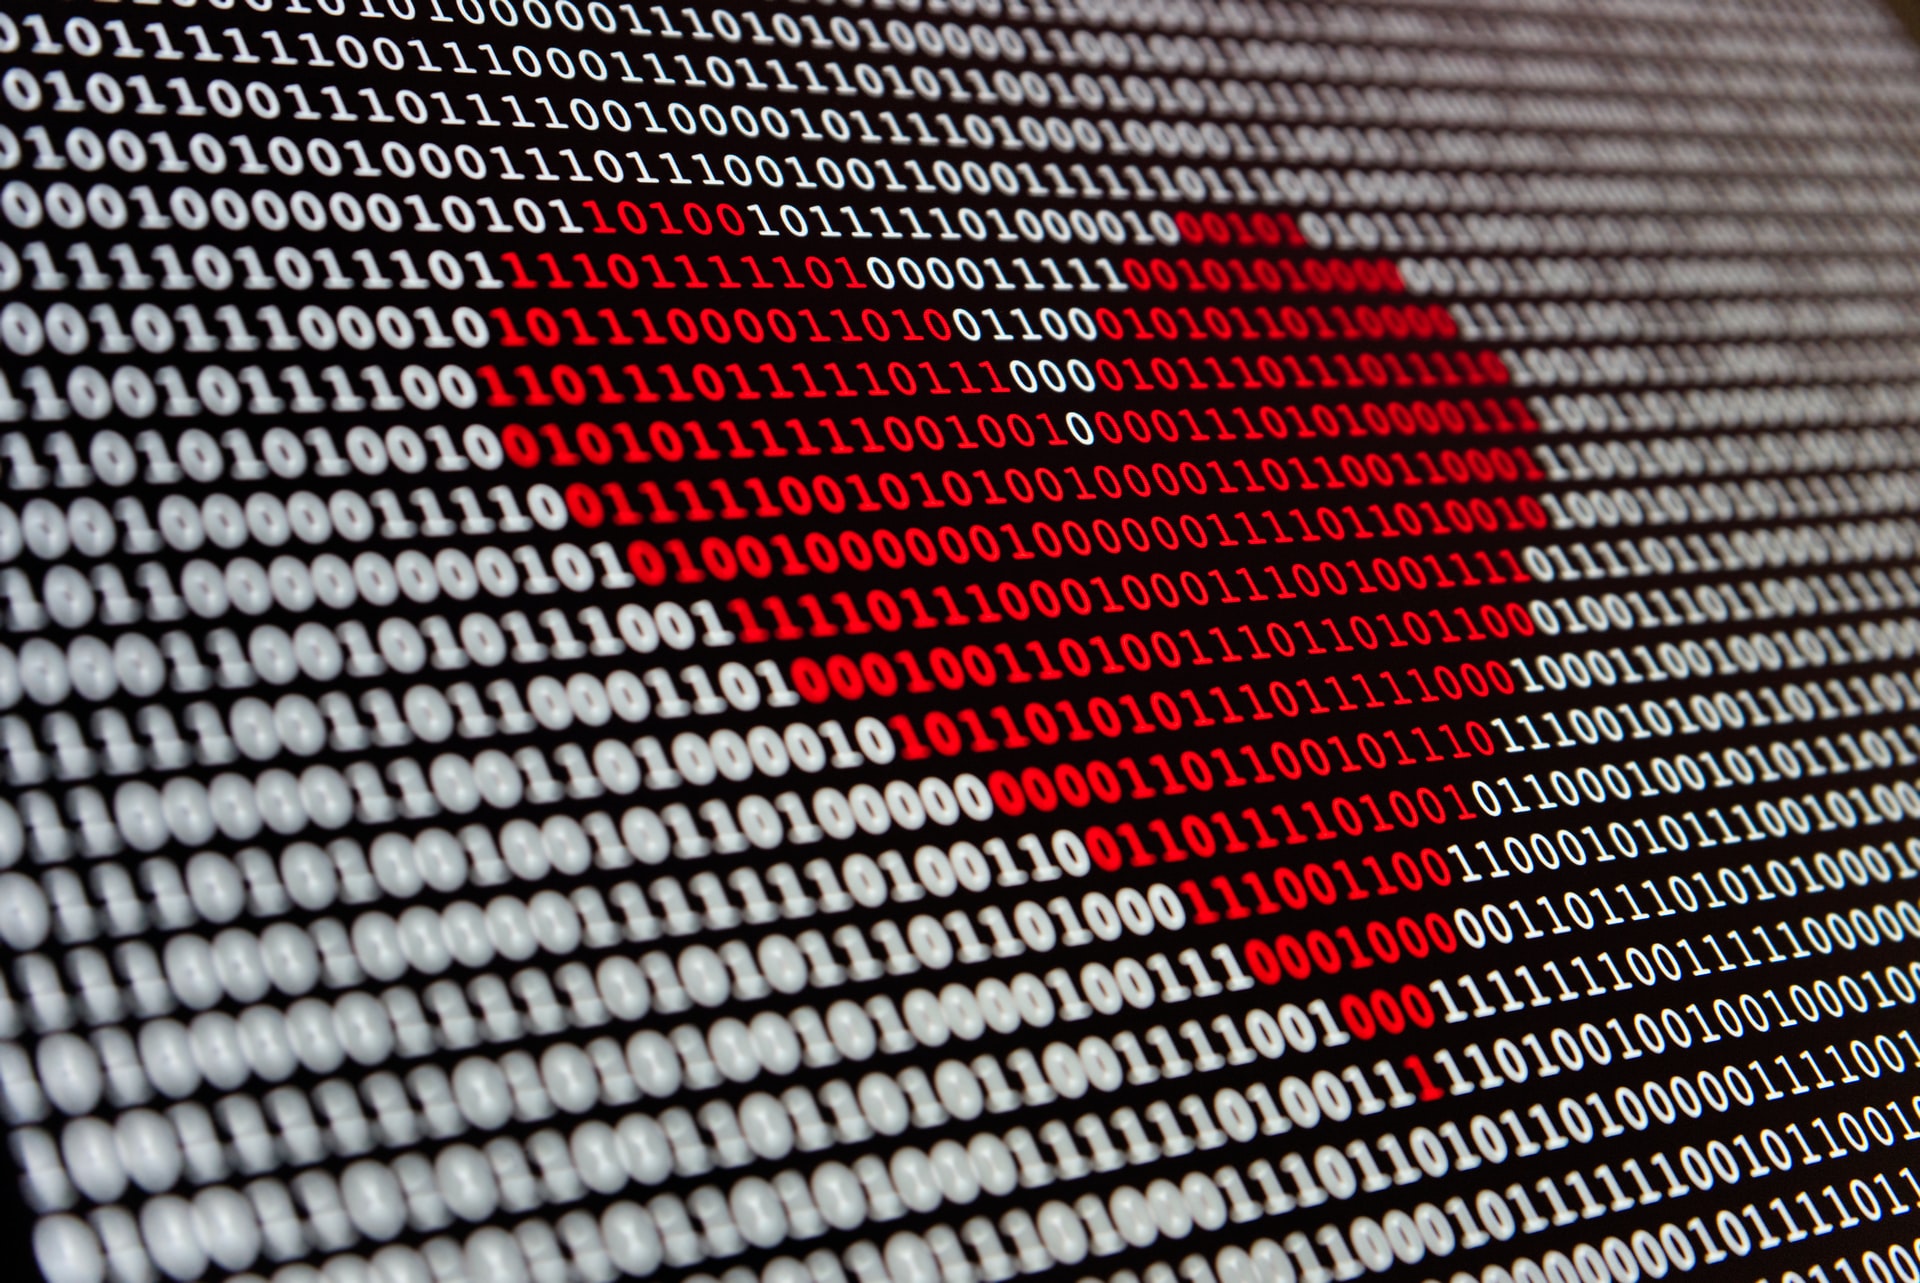 'Code in terminal forming a red heart'